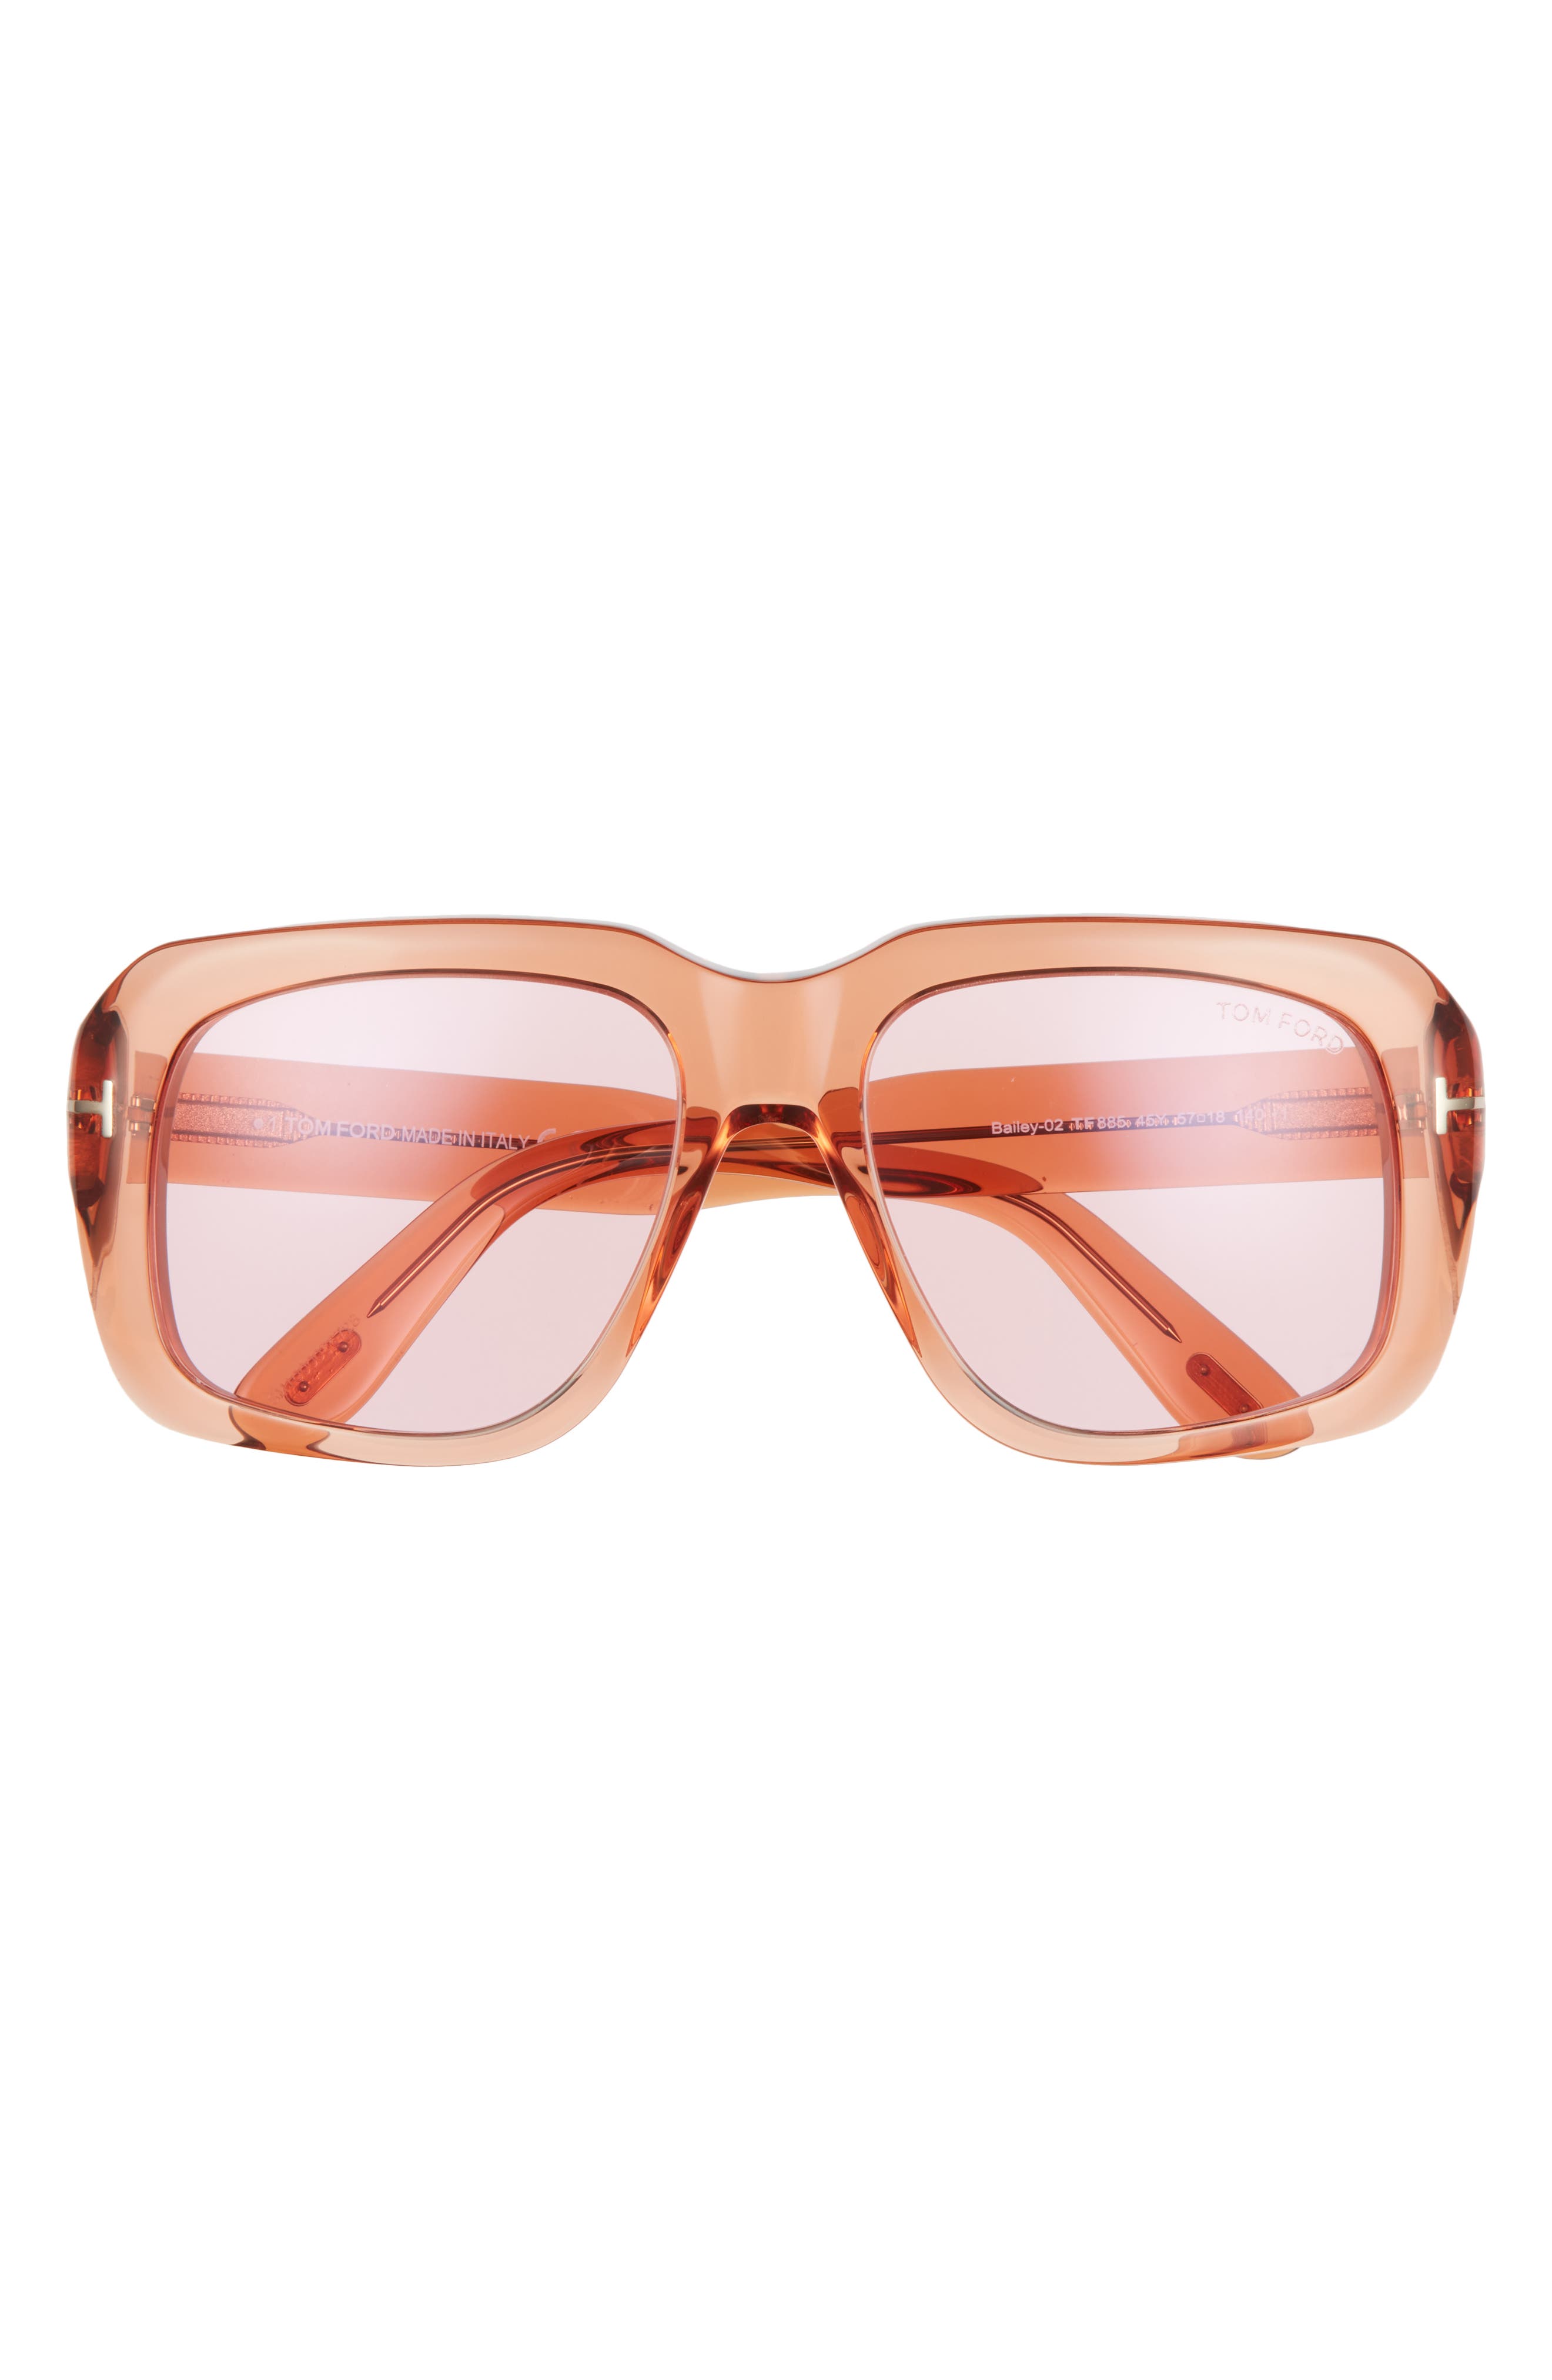 Tom Ford Bailey 57mm Tinted Geometric Sunglasses in Shiny Transparent Peach /Pink at Nordstrom